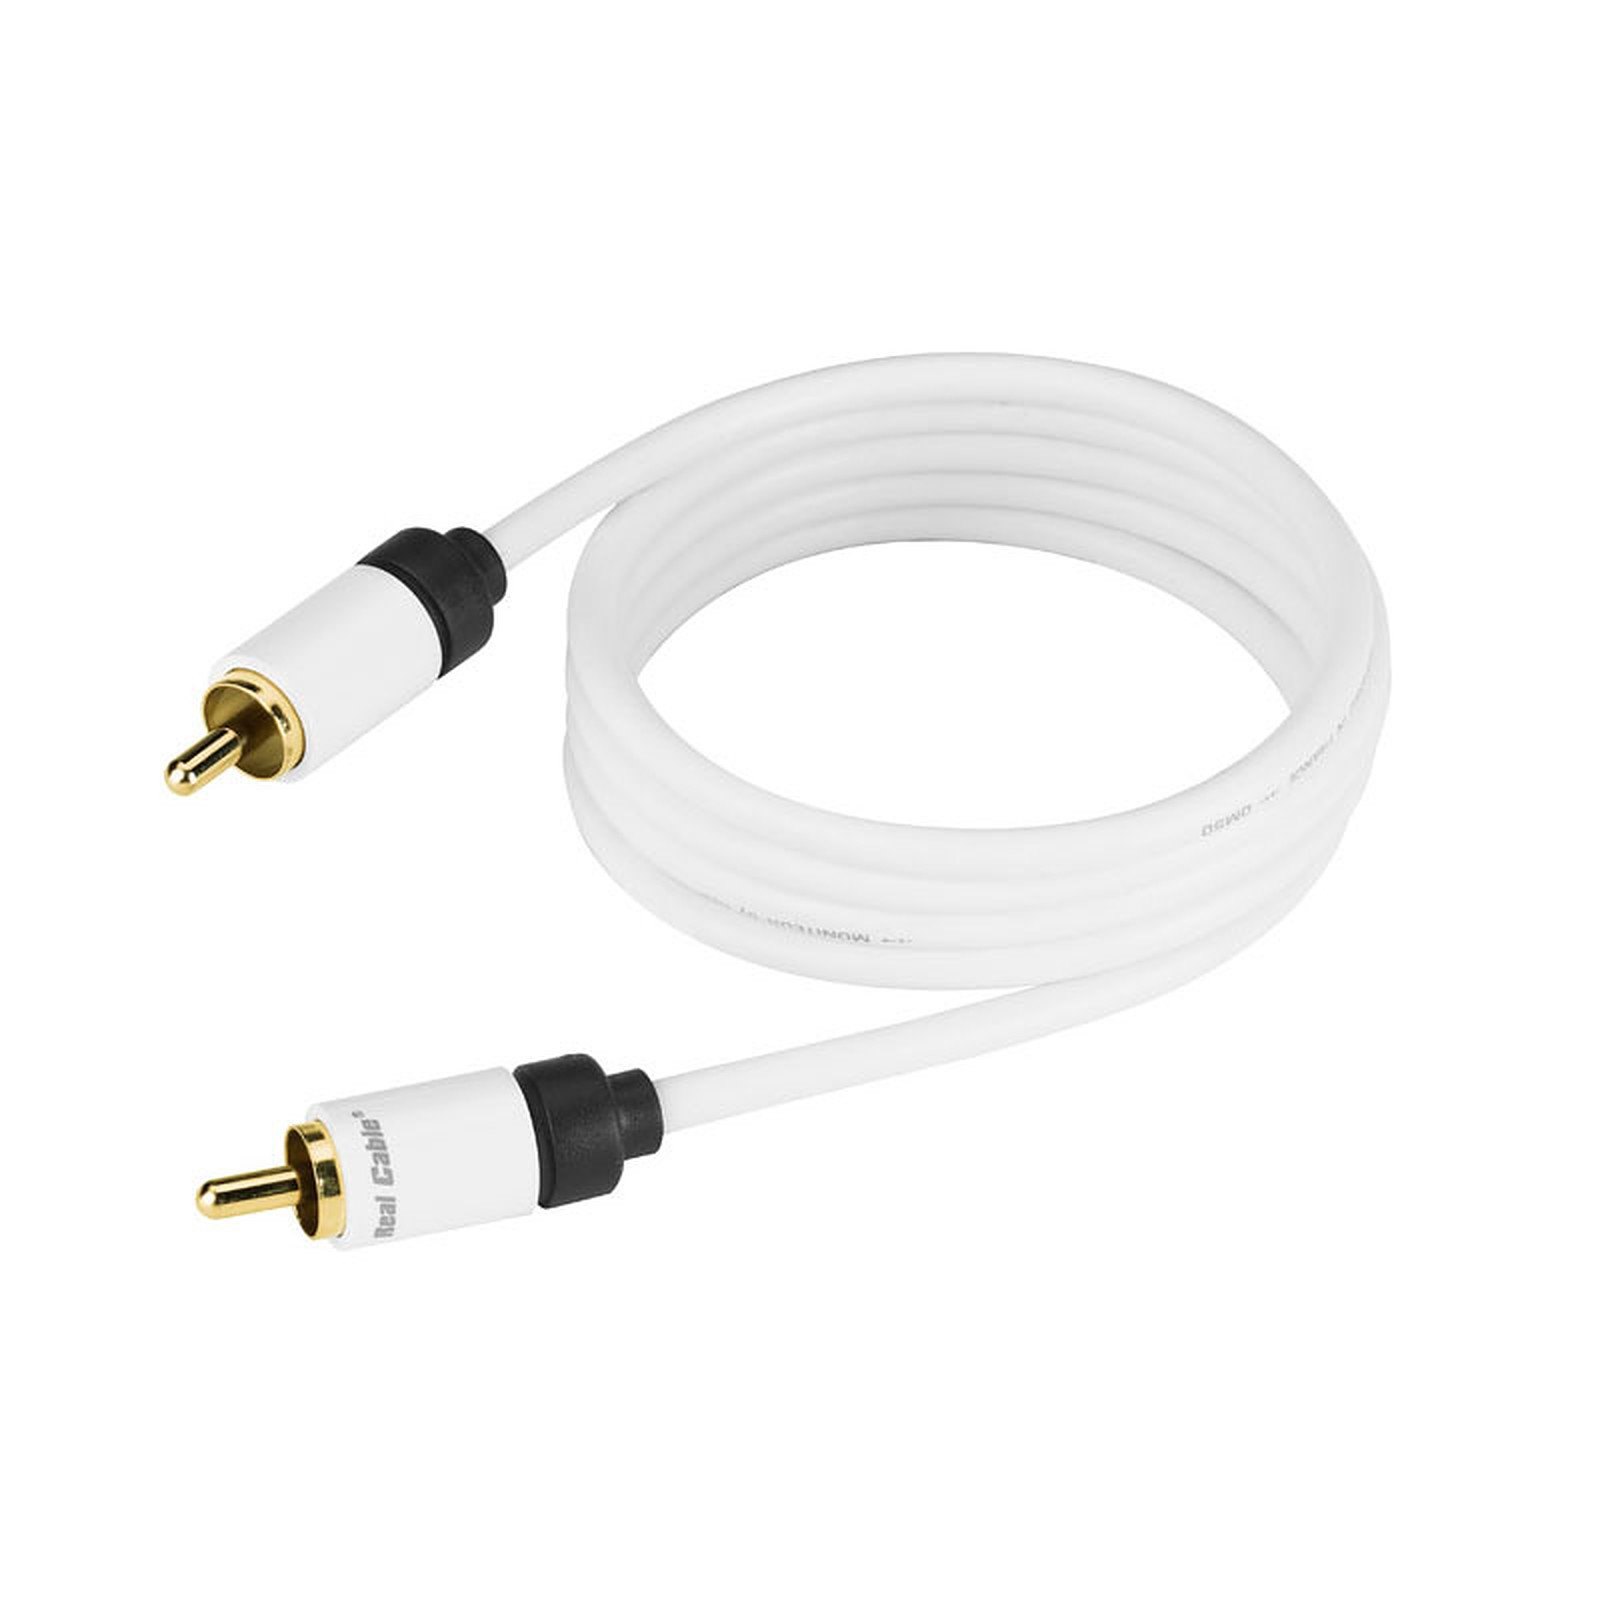 Real Cable SUB-1 2m - Cable audio RCA Real Cable